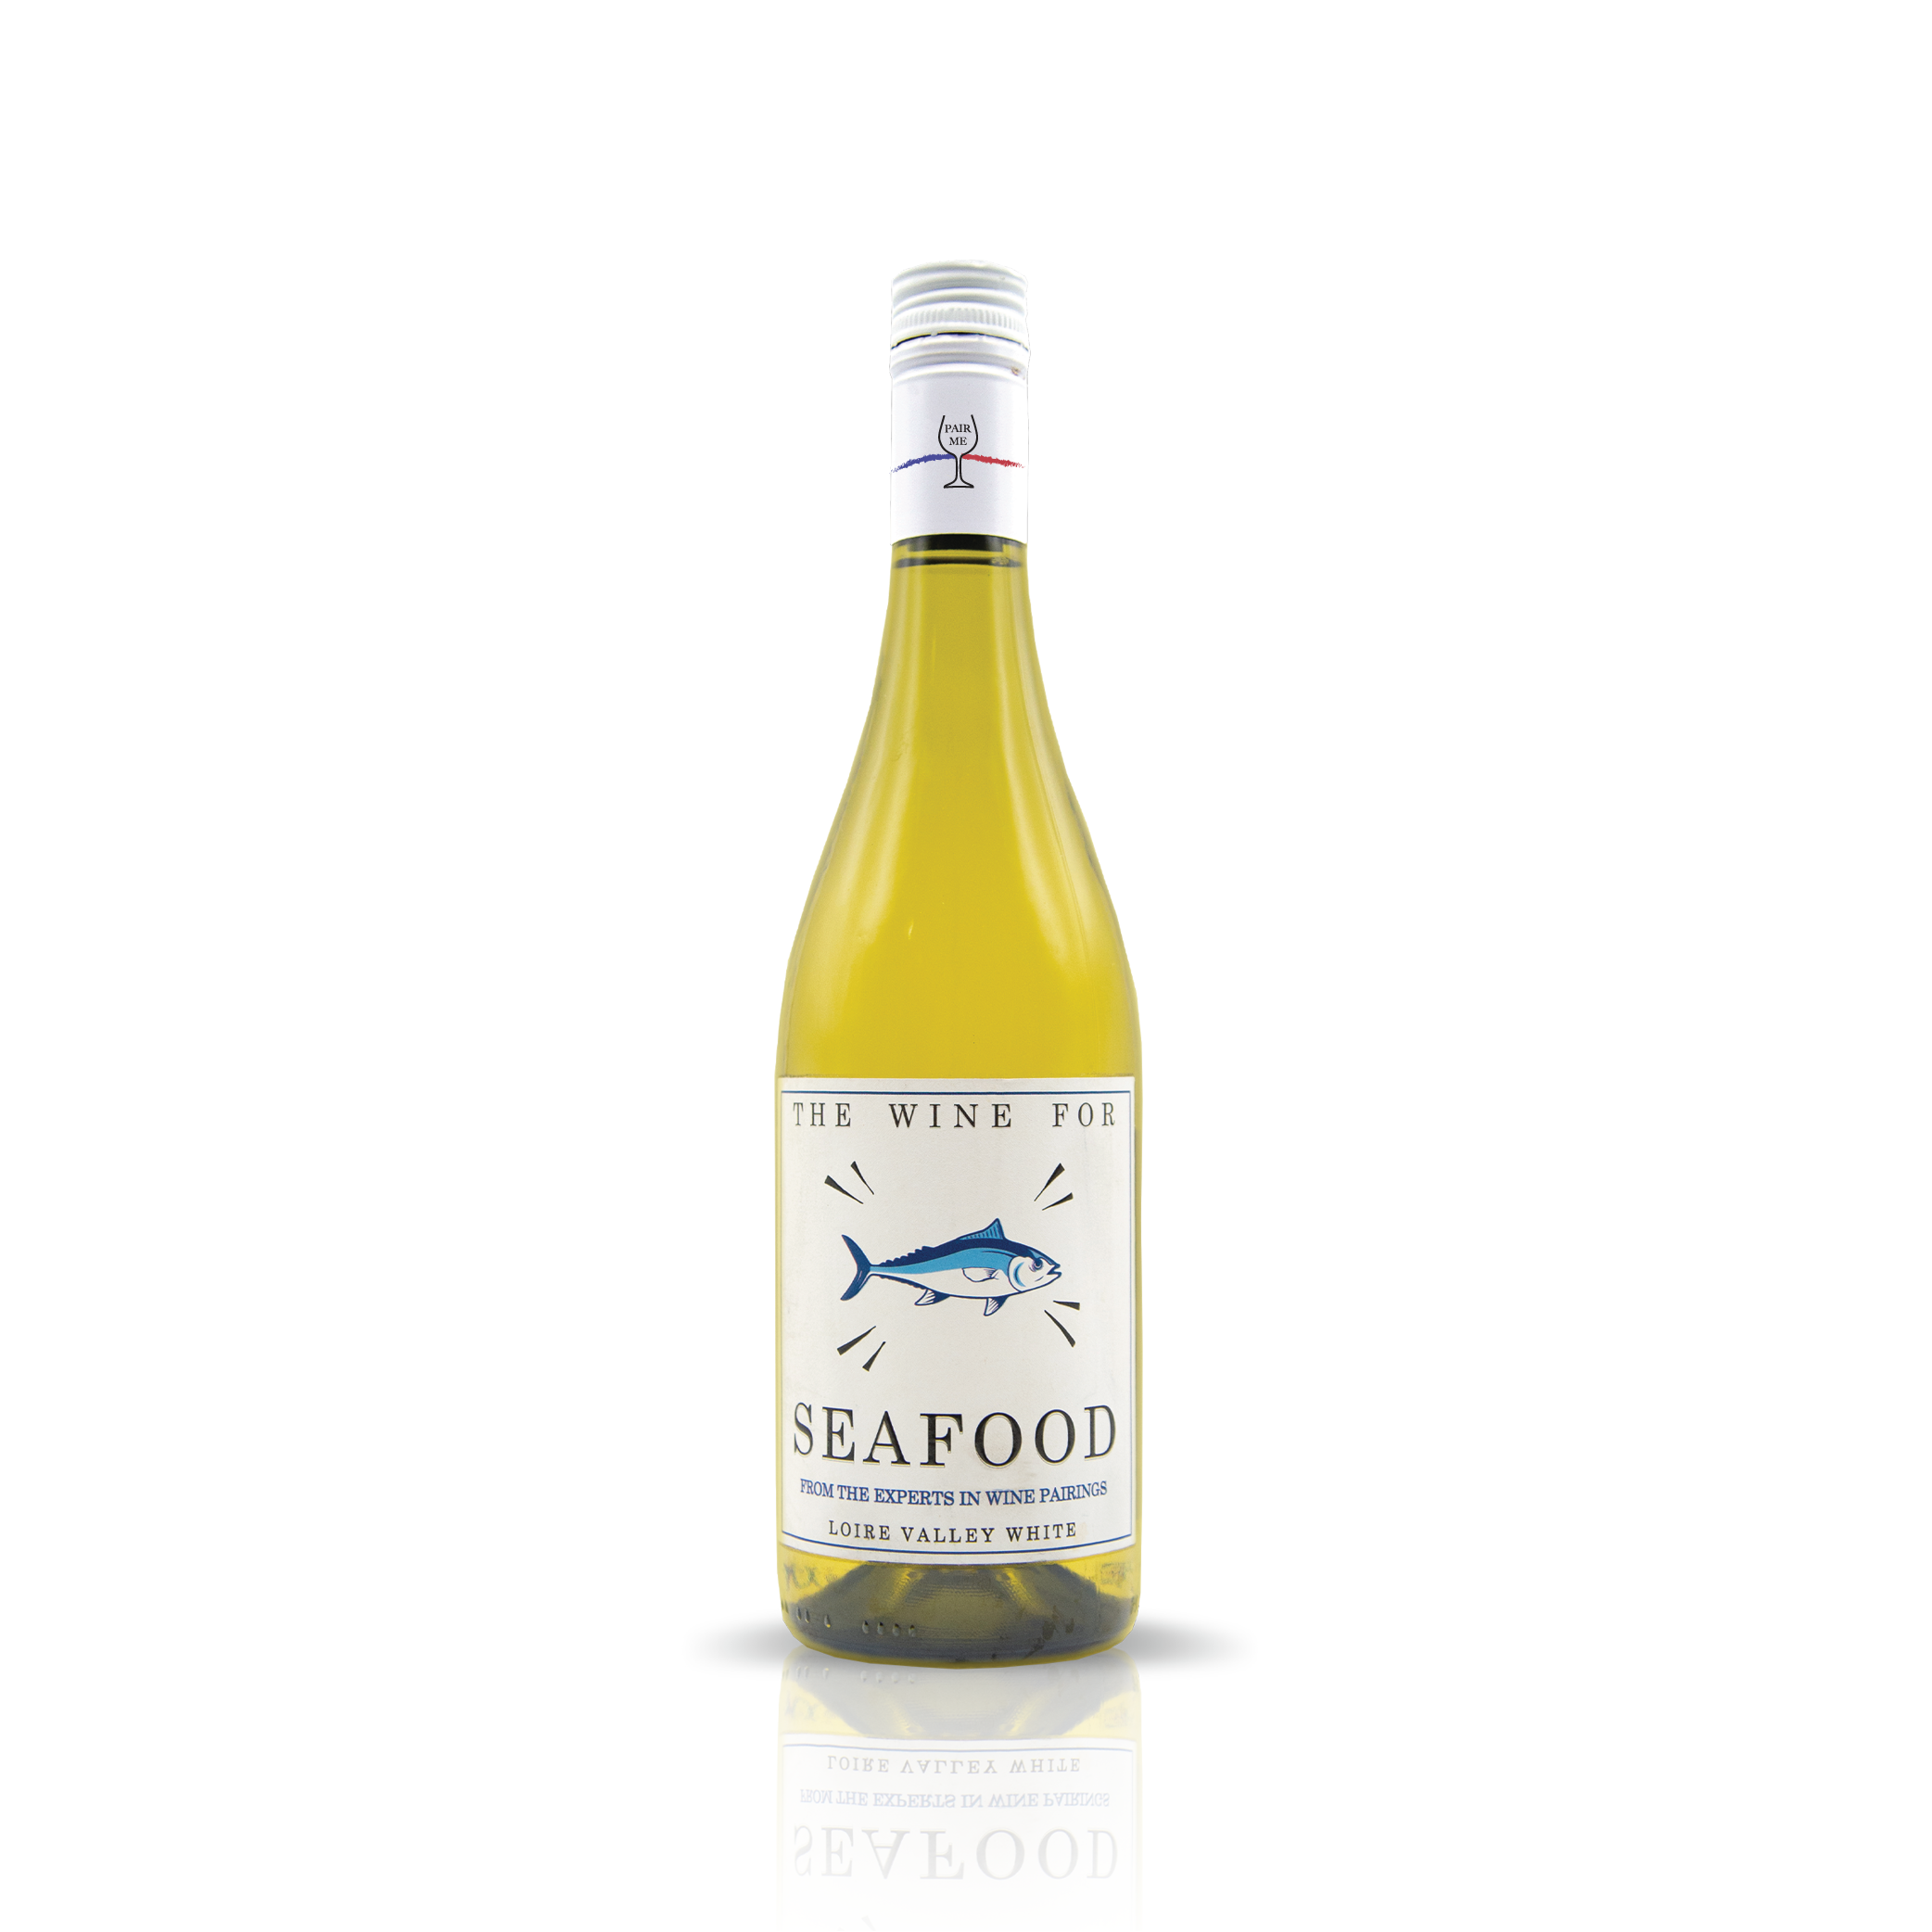 THE WINE FOR SEAFOOD